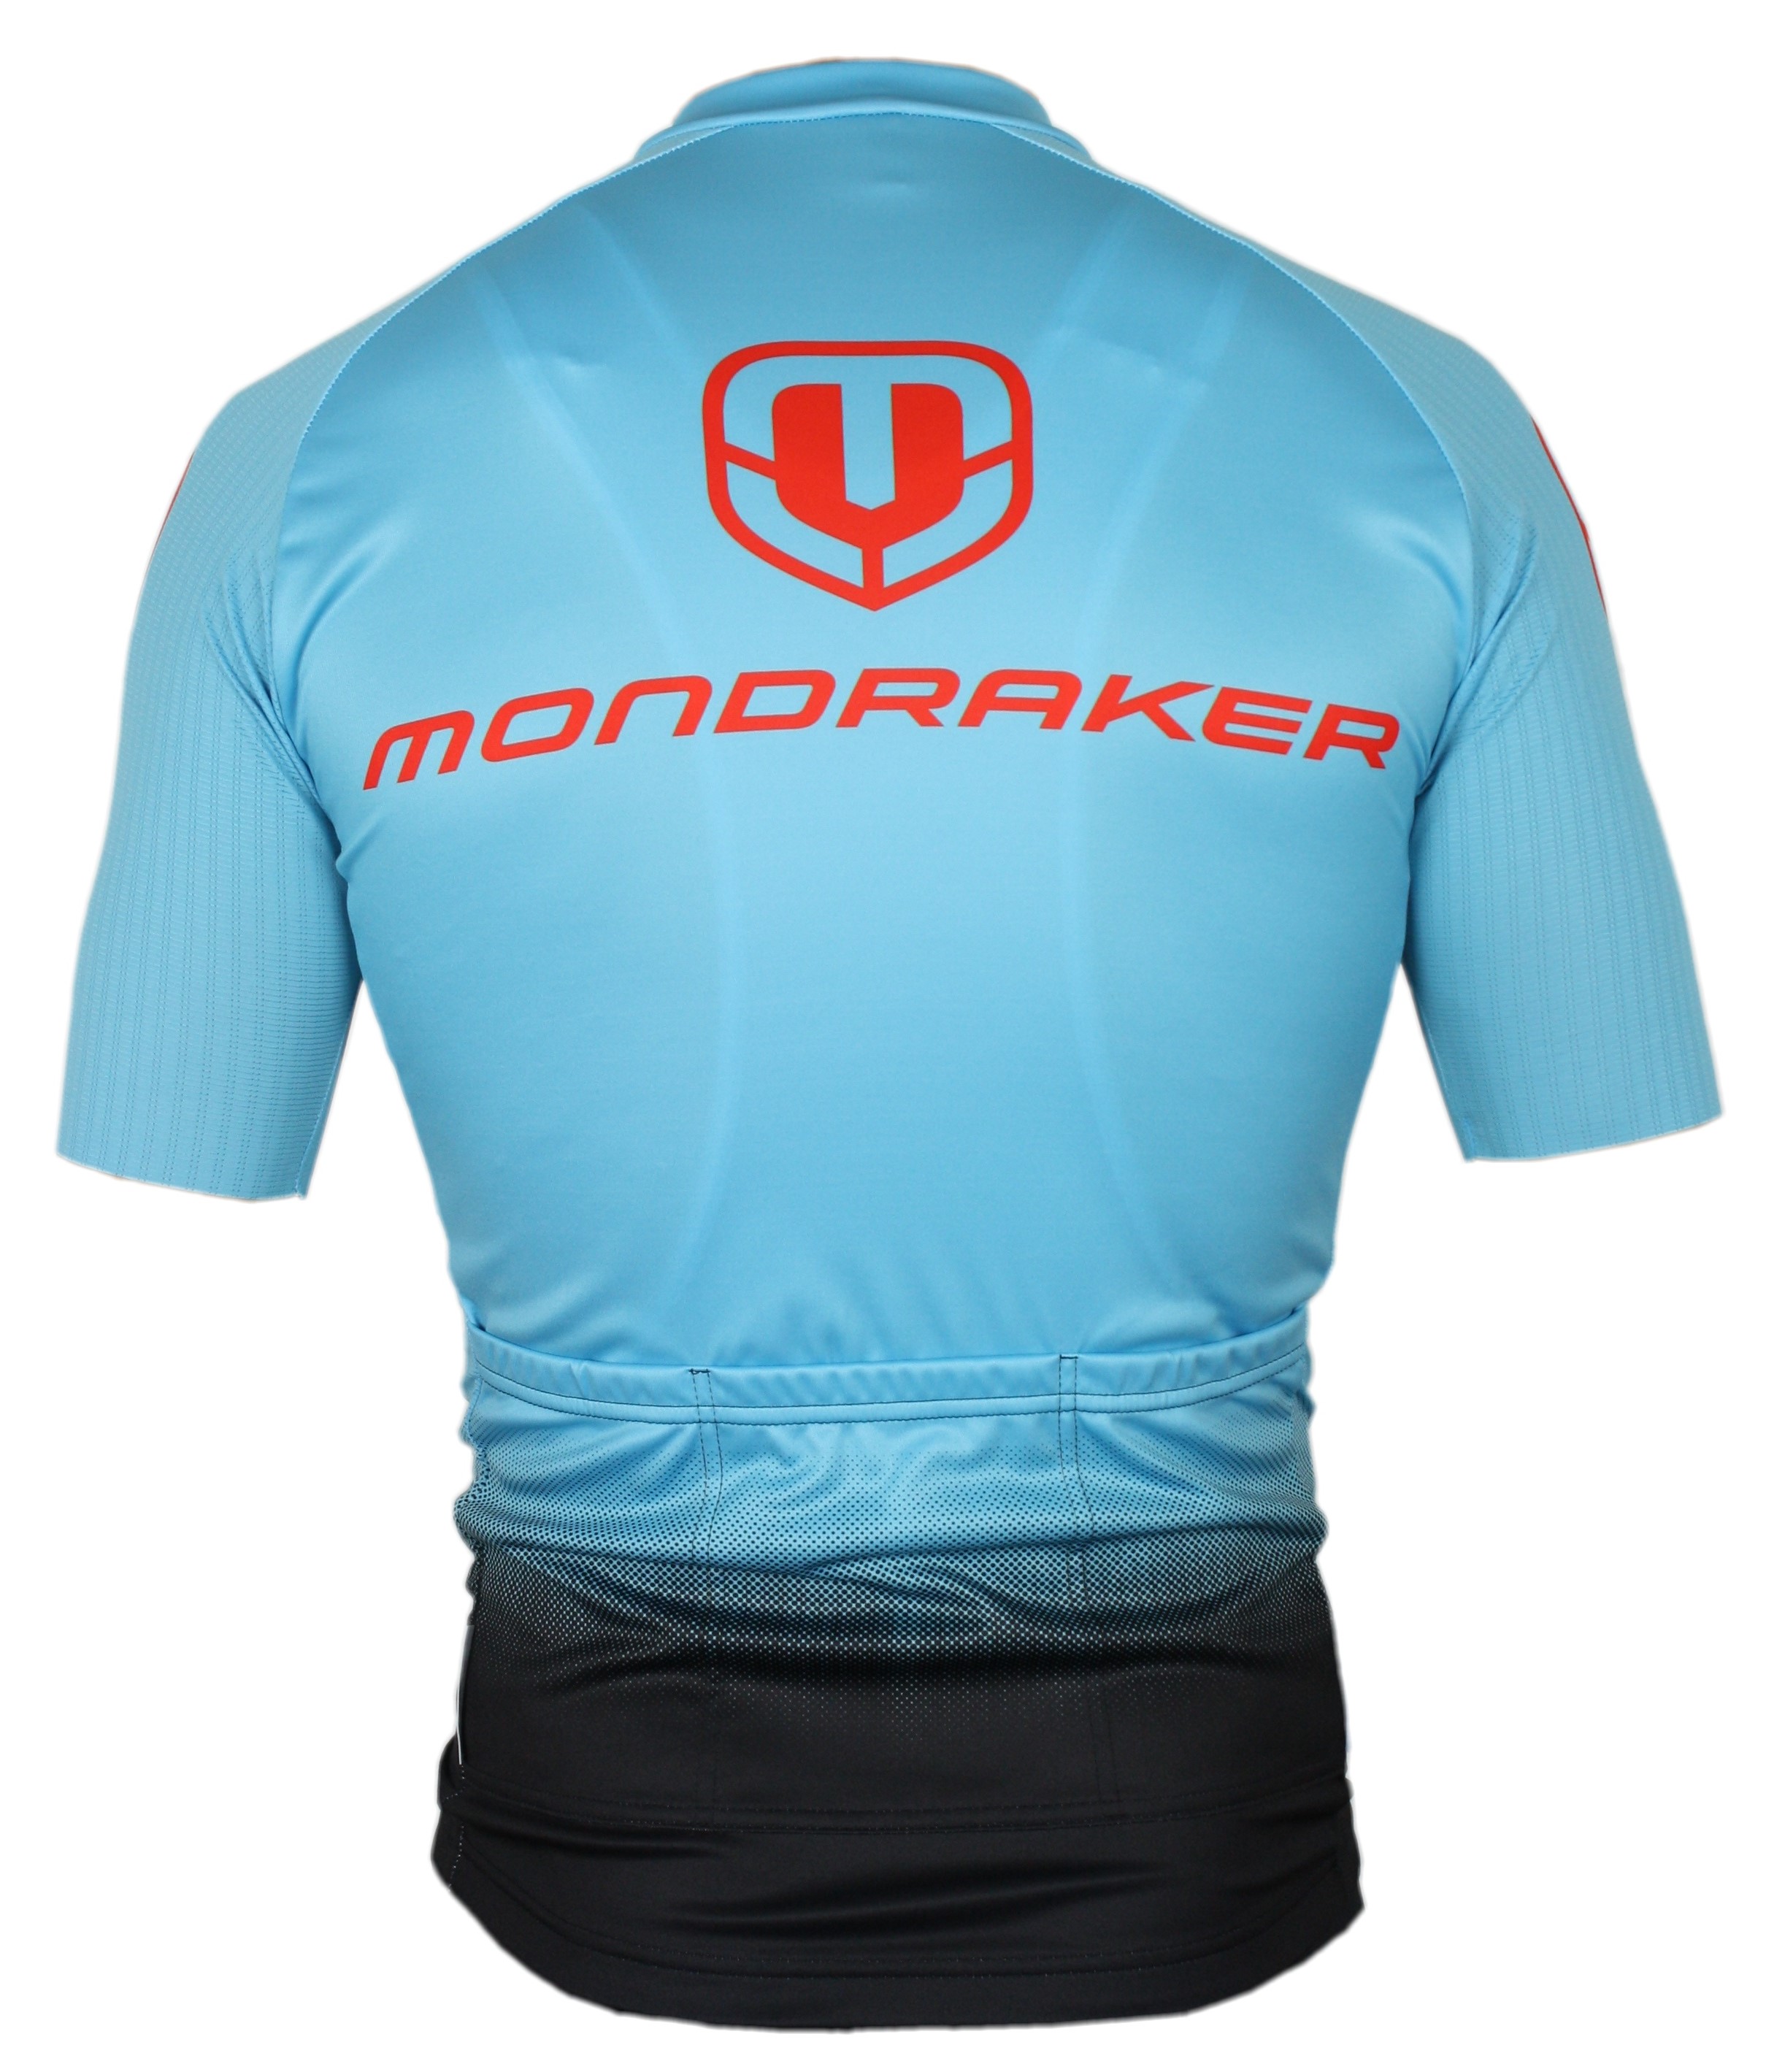 XC Jersey, blue/red